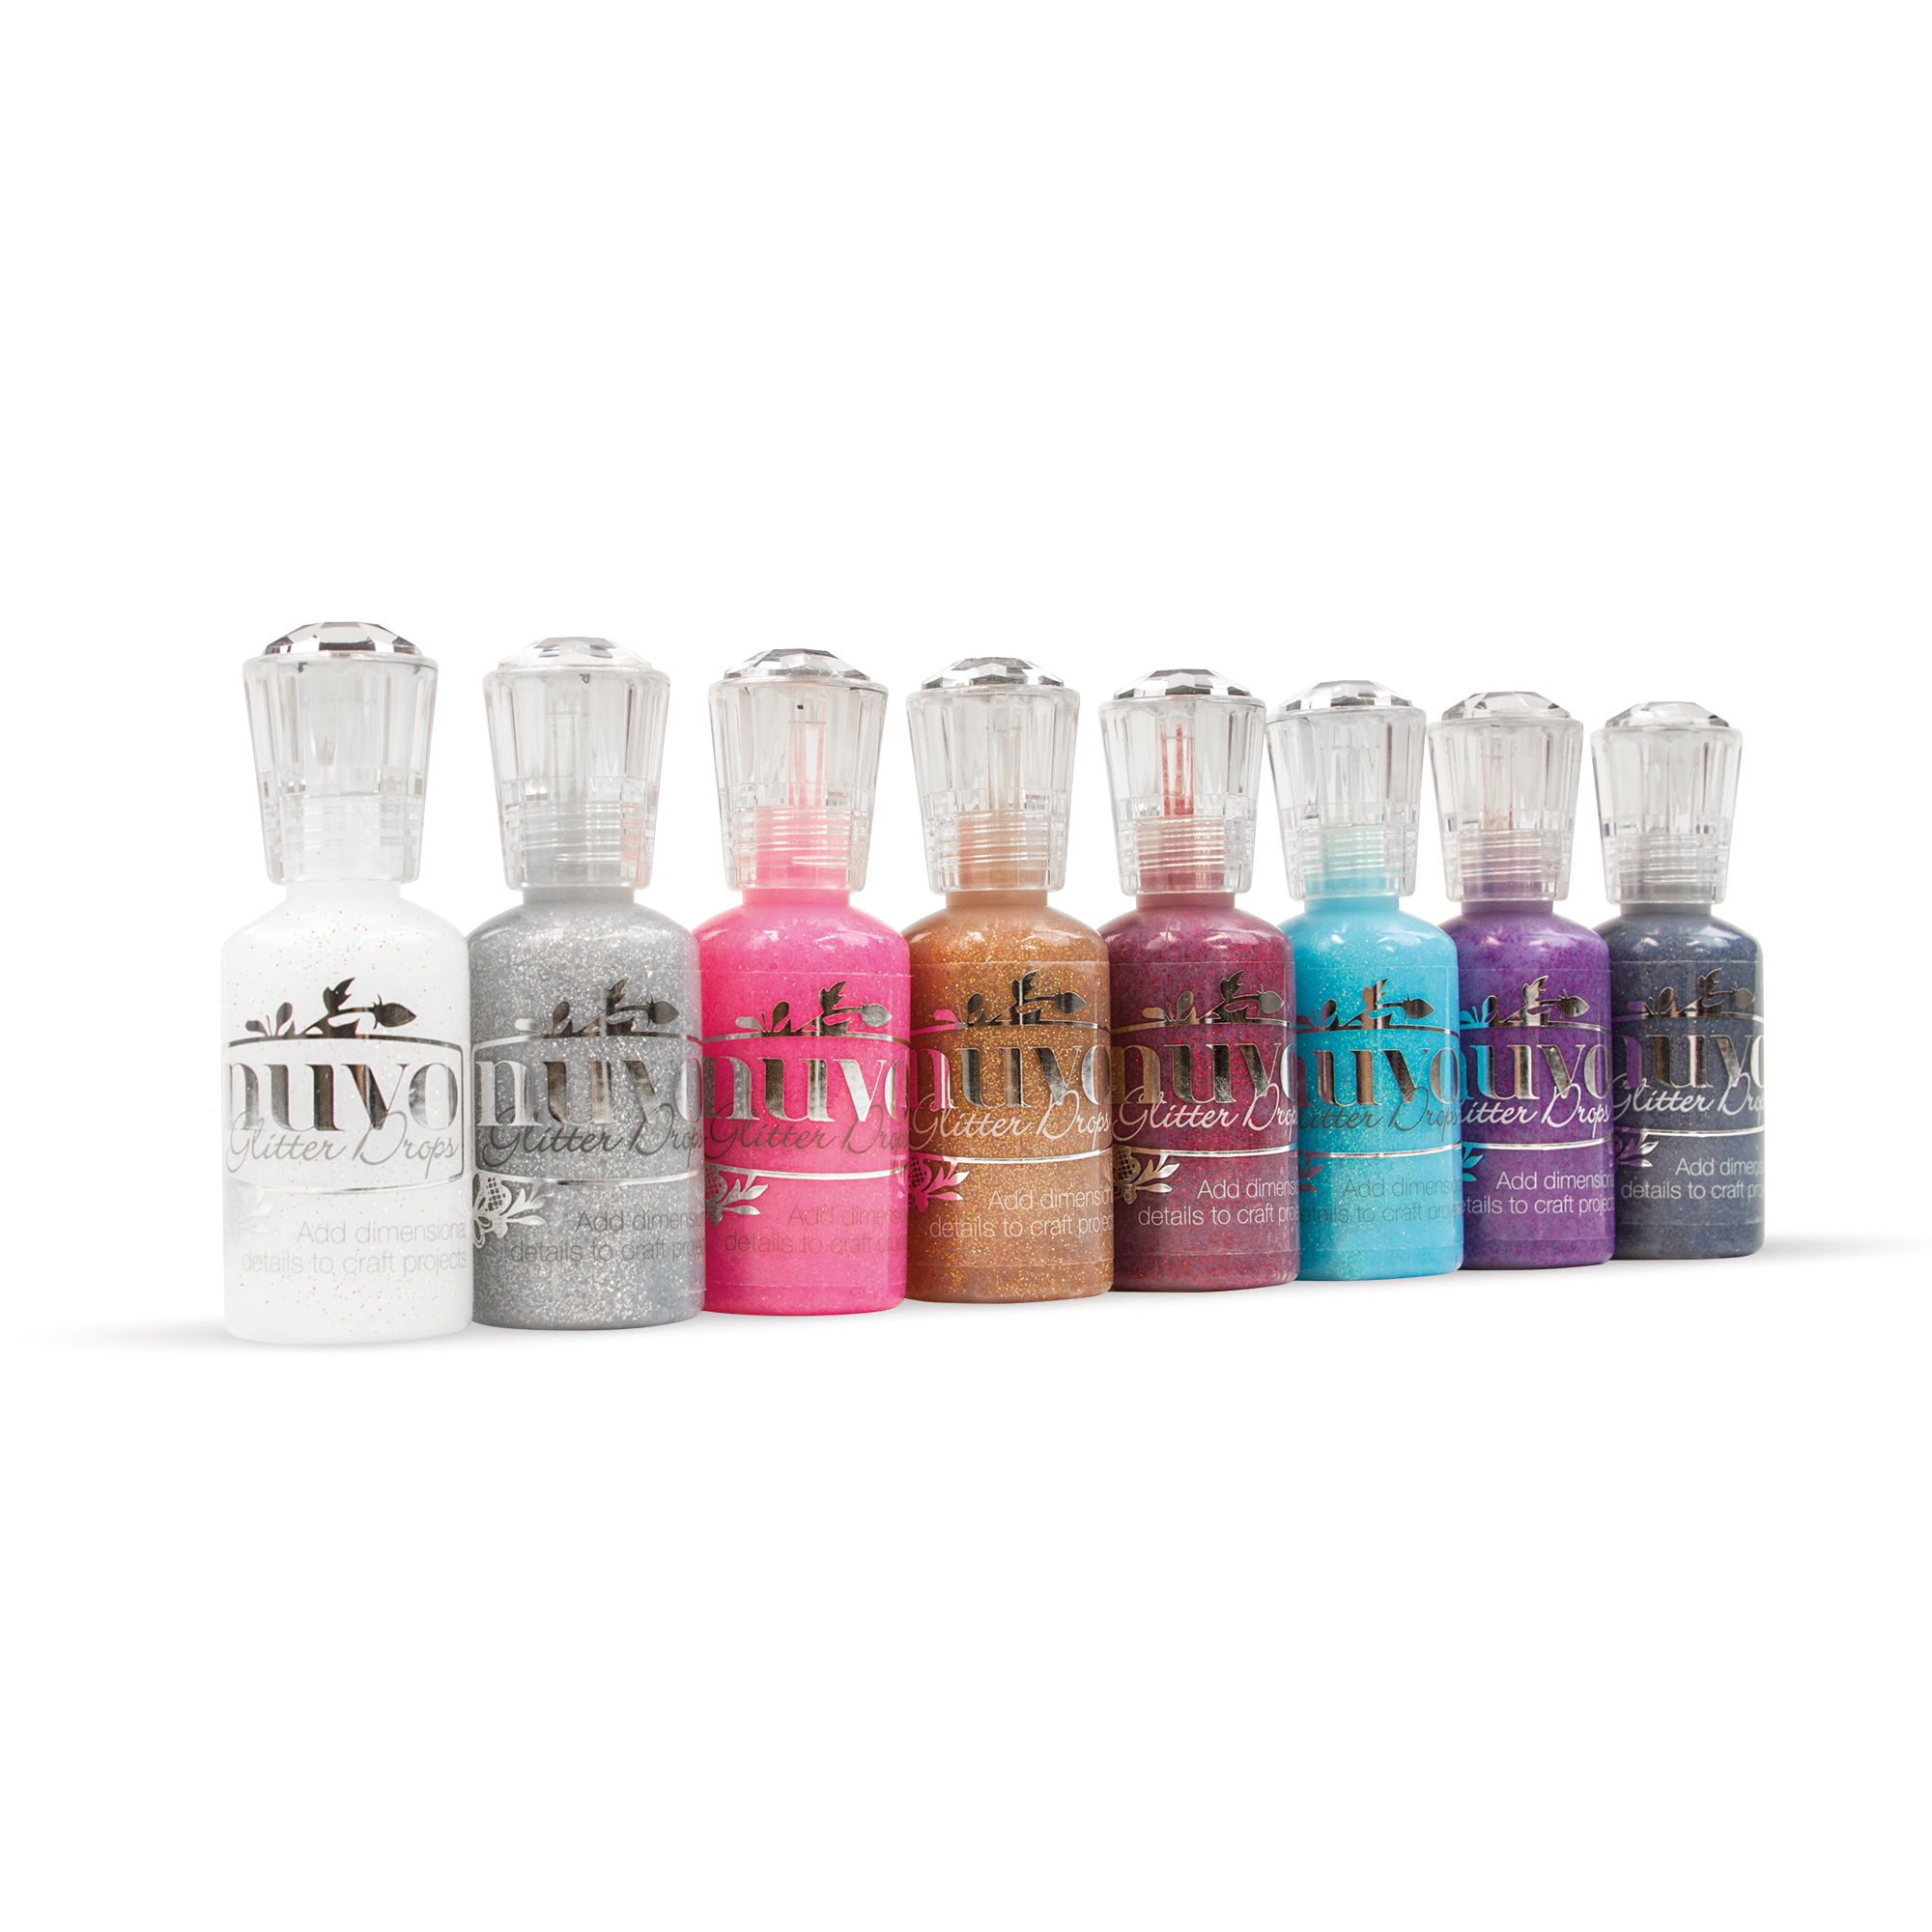 In Touch: Tonic Nuvo Drops - A Product Close-Up